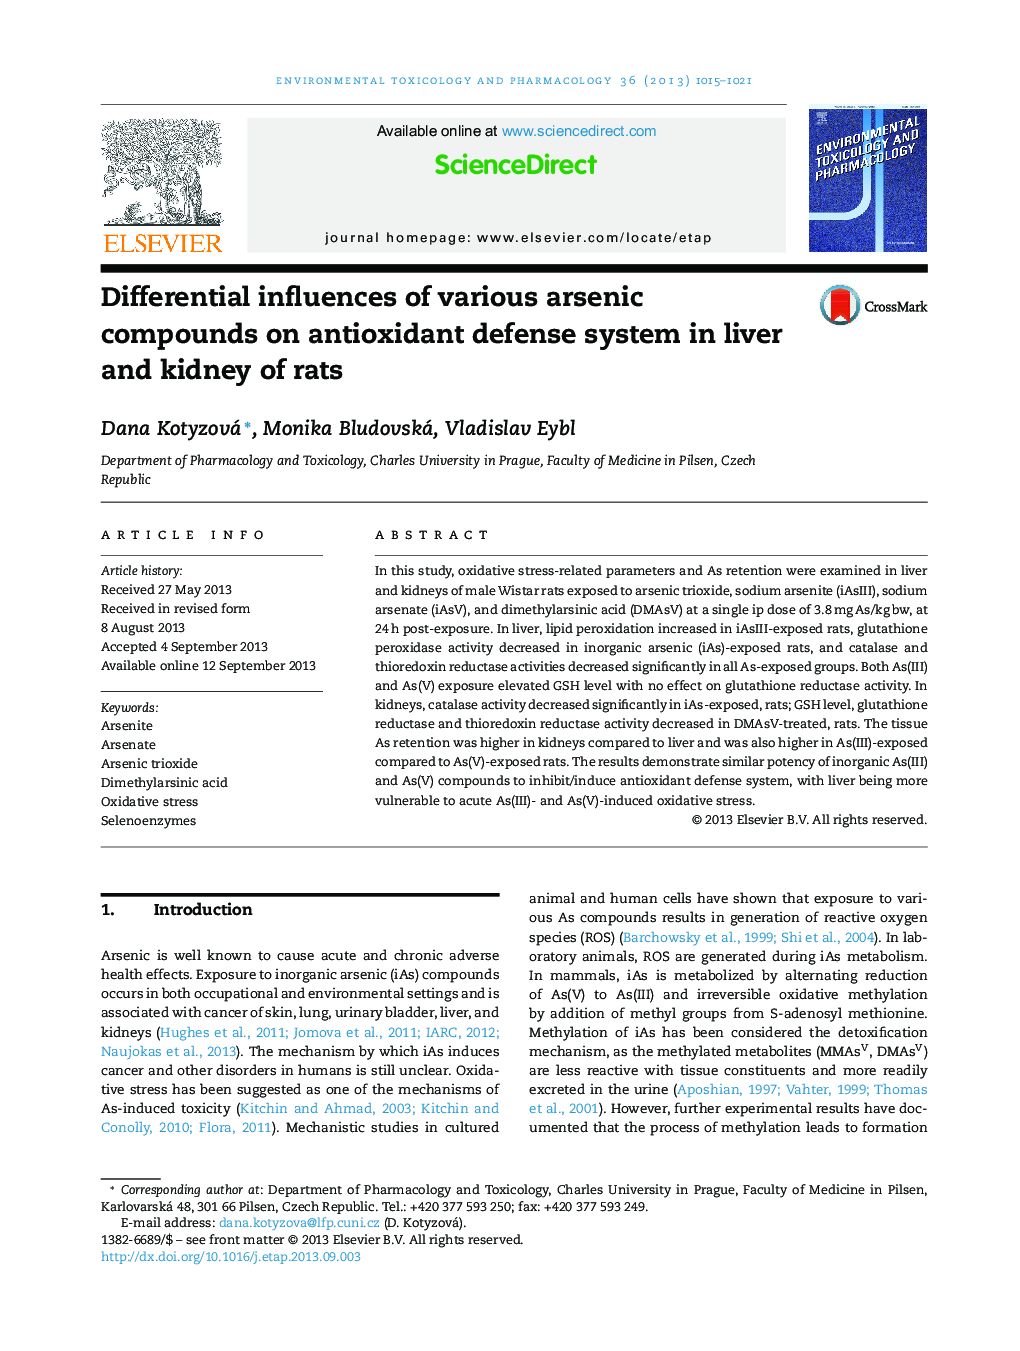 Differential influences of various arsenic compounds on antioxidant defense system in liver and kidney of rats